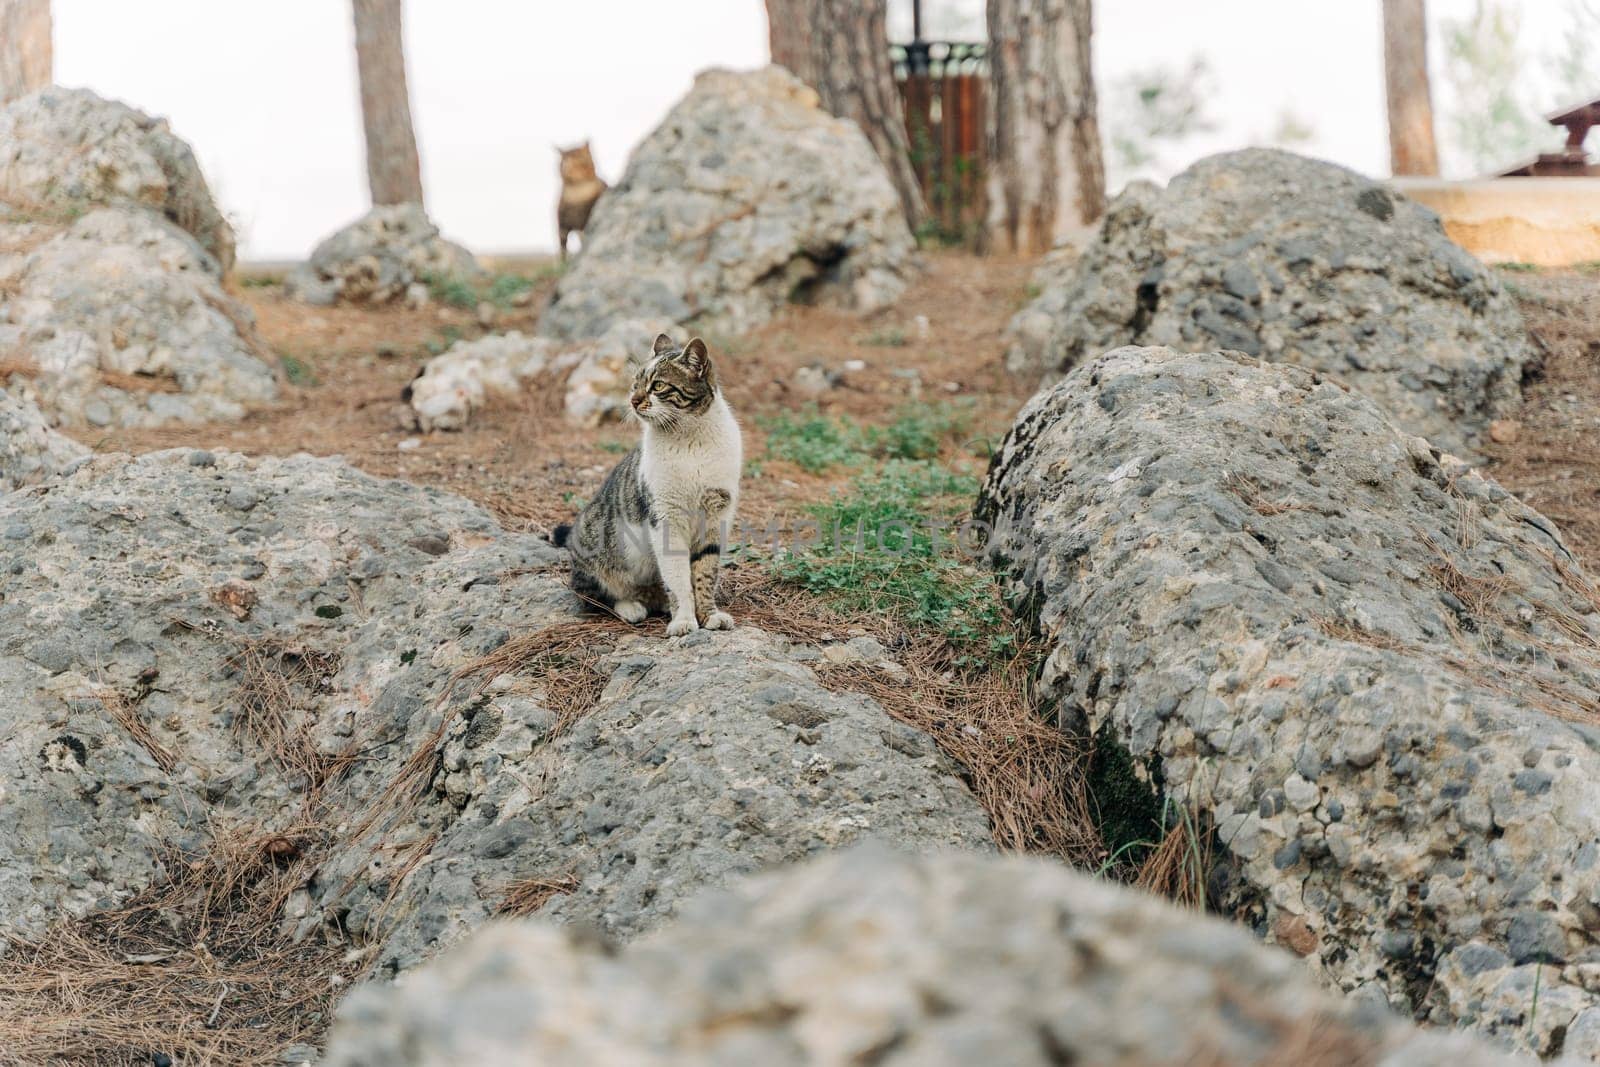 A portrait of a homeless abandoned striped stray cat surrounded by granite rocky boulders in the forest city park by Ostanina